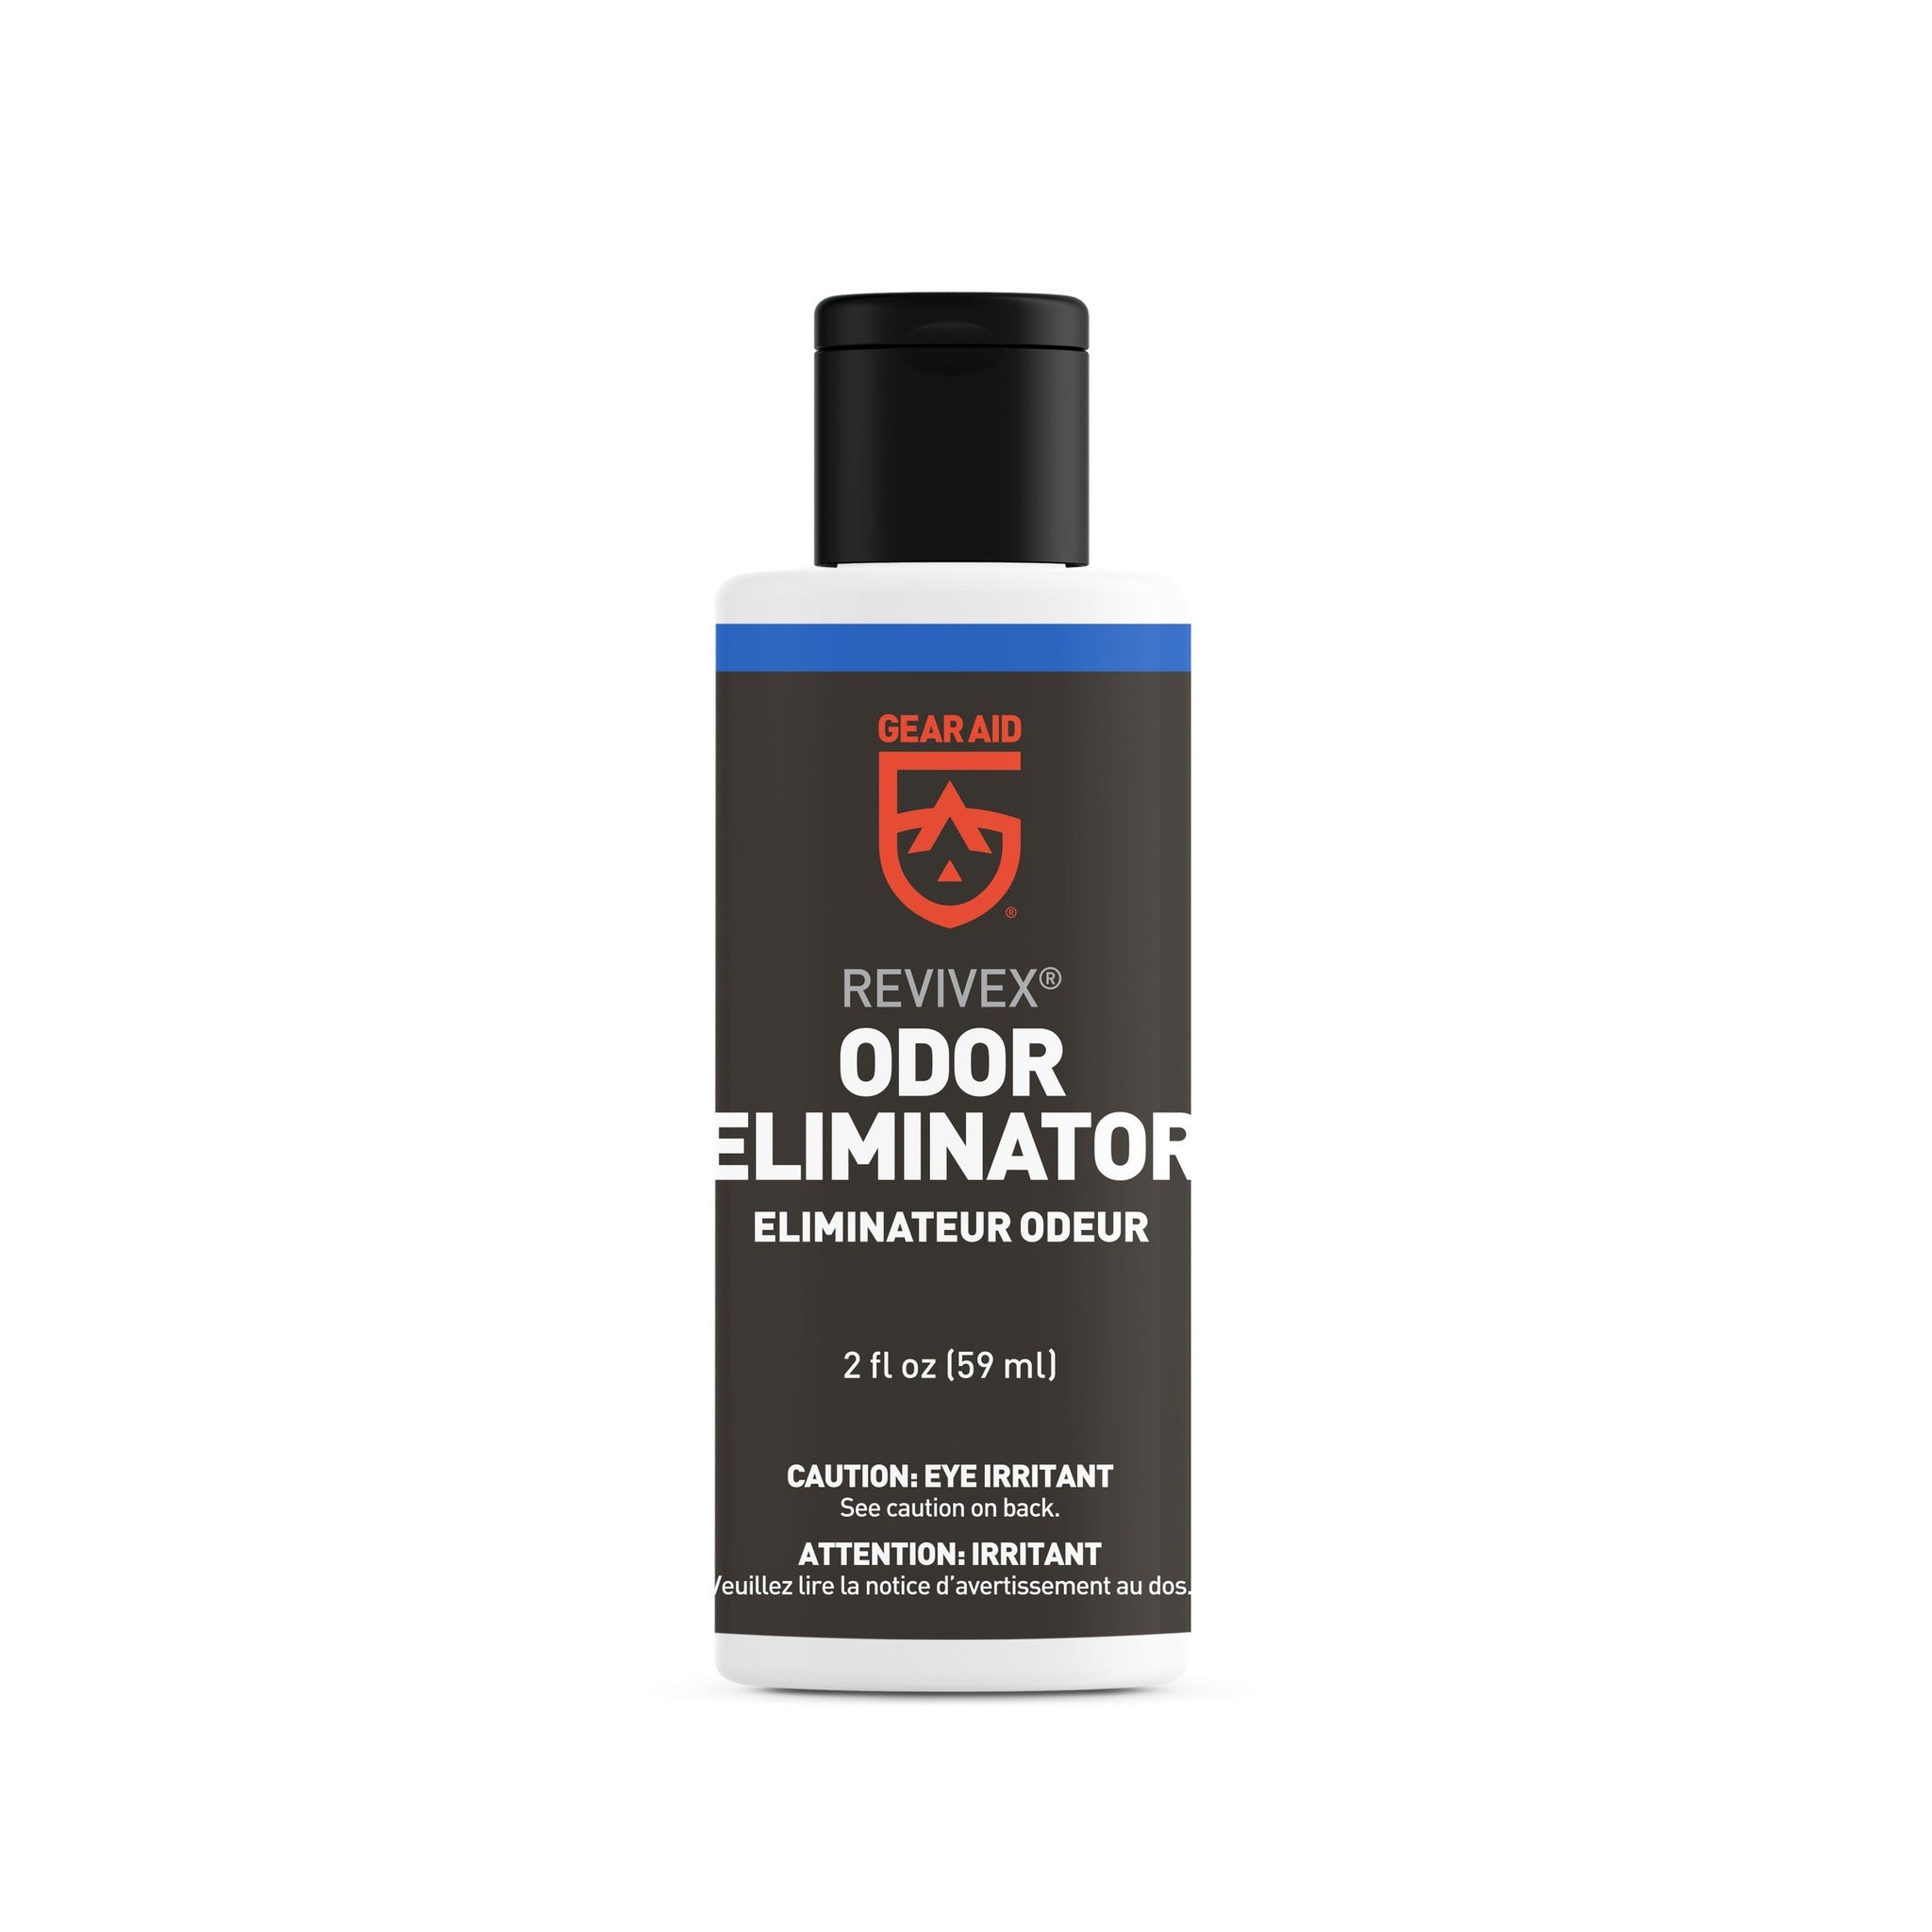 Gear Aid-Revivex Odor Eliminator-sewing notion-gather here online